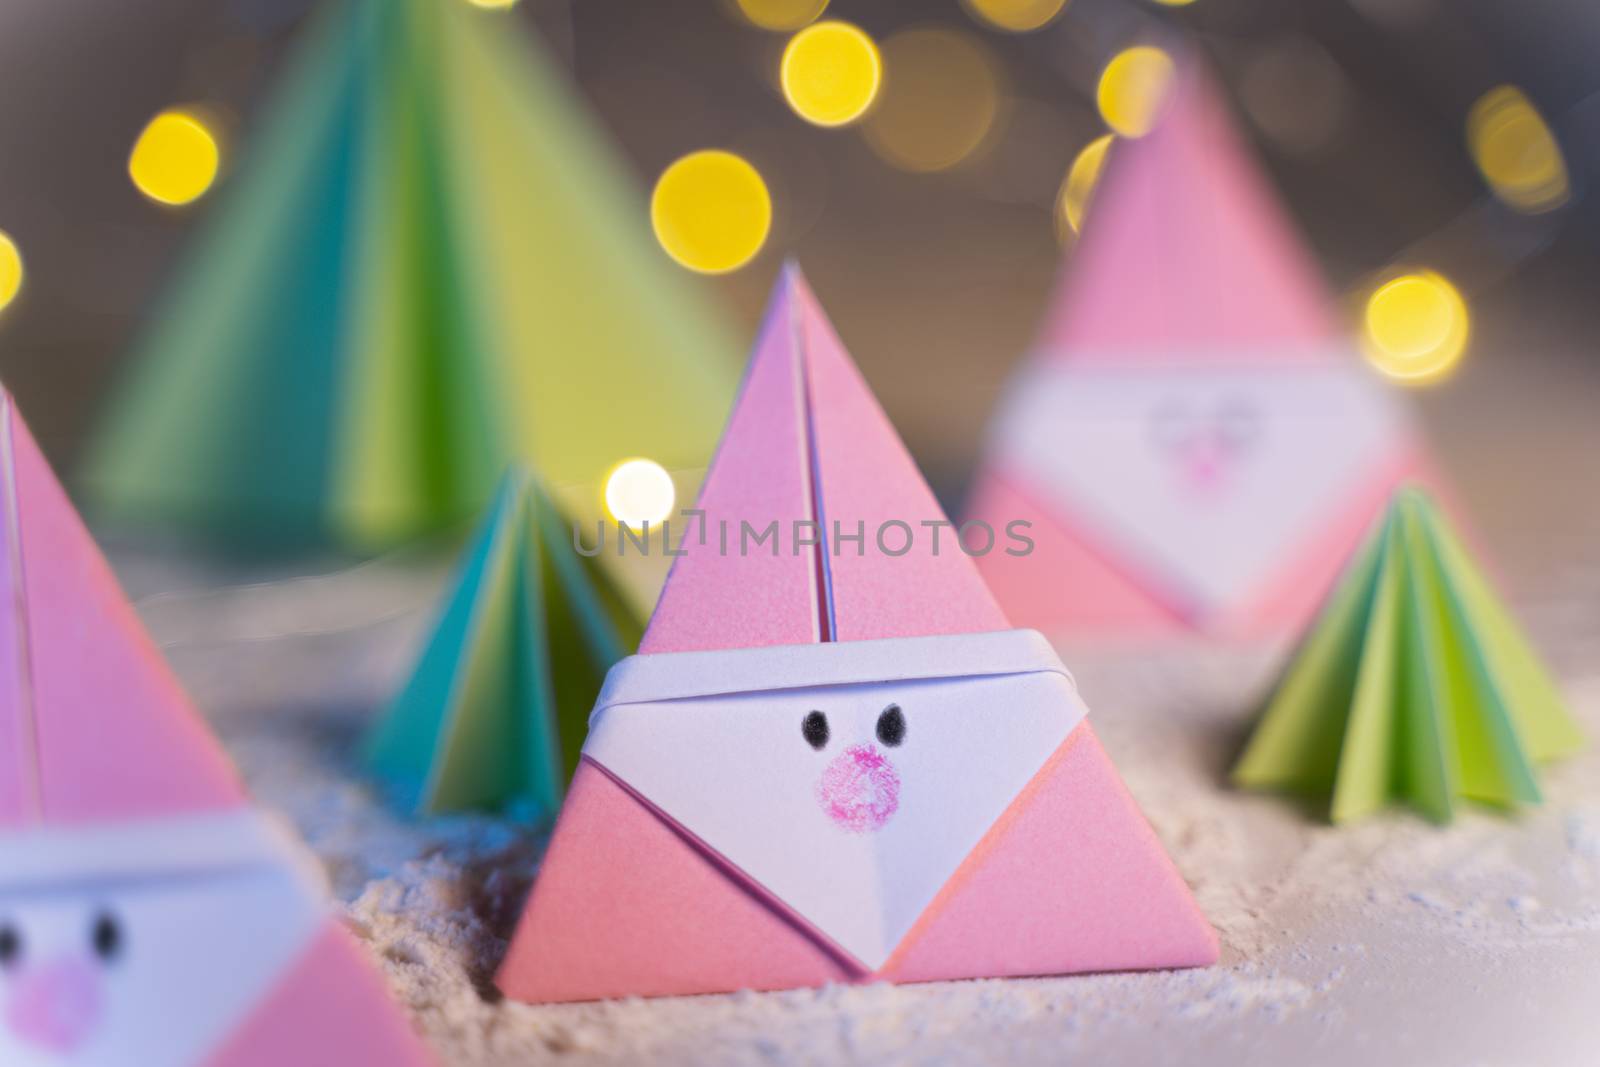 Origami Xmas scene with Santa claus and crhistmas trees in paper craft by tanaonte